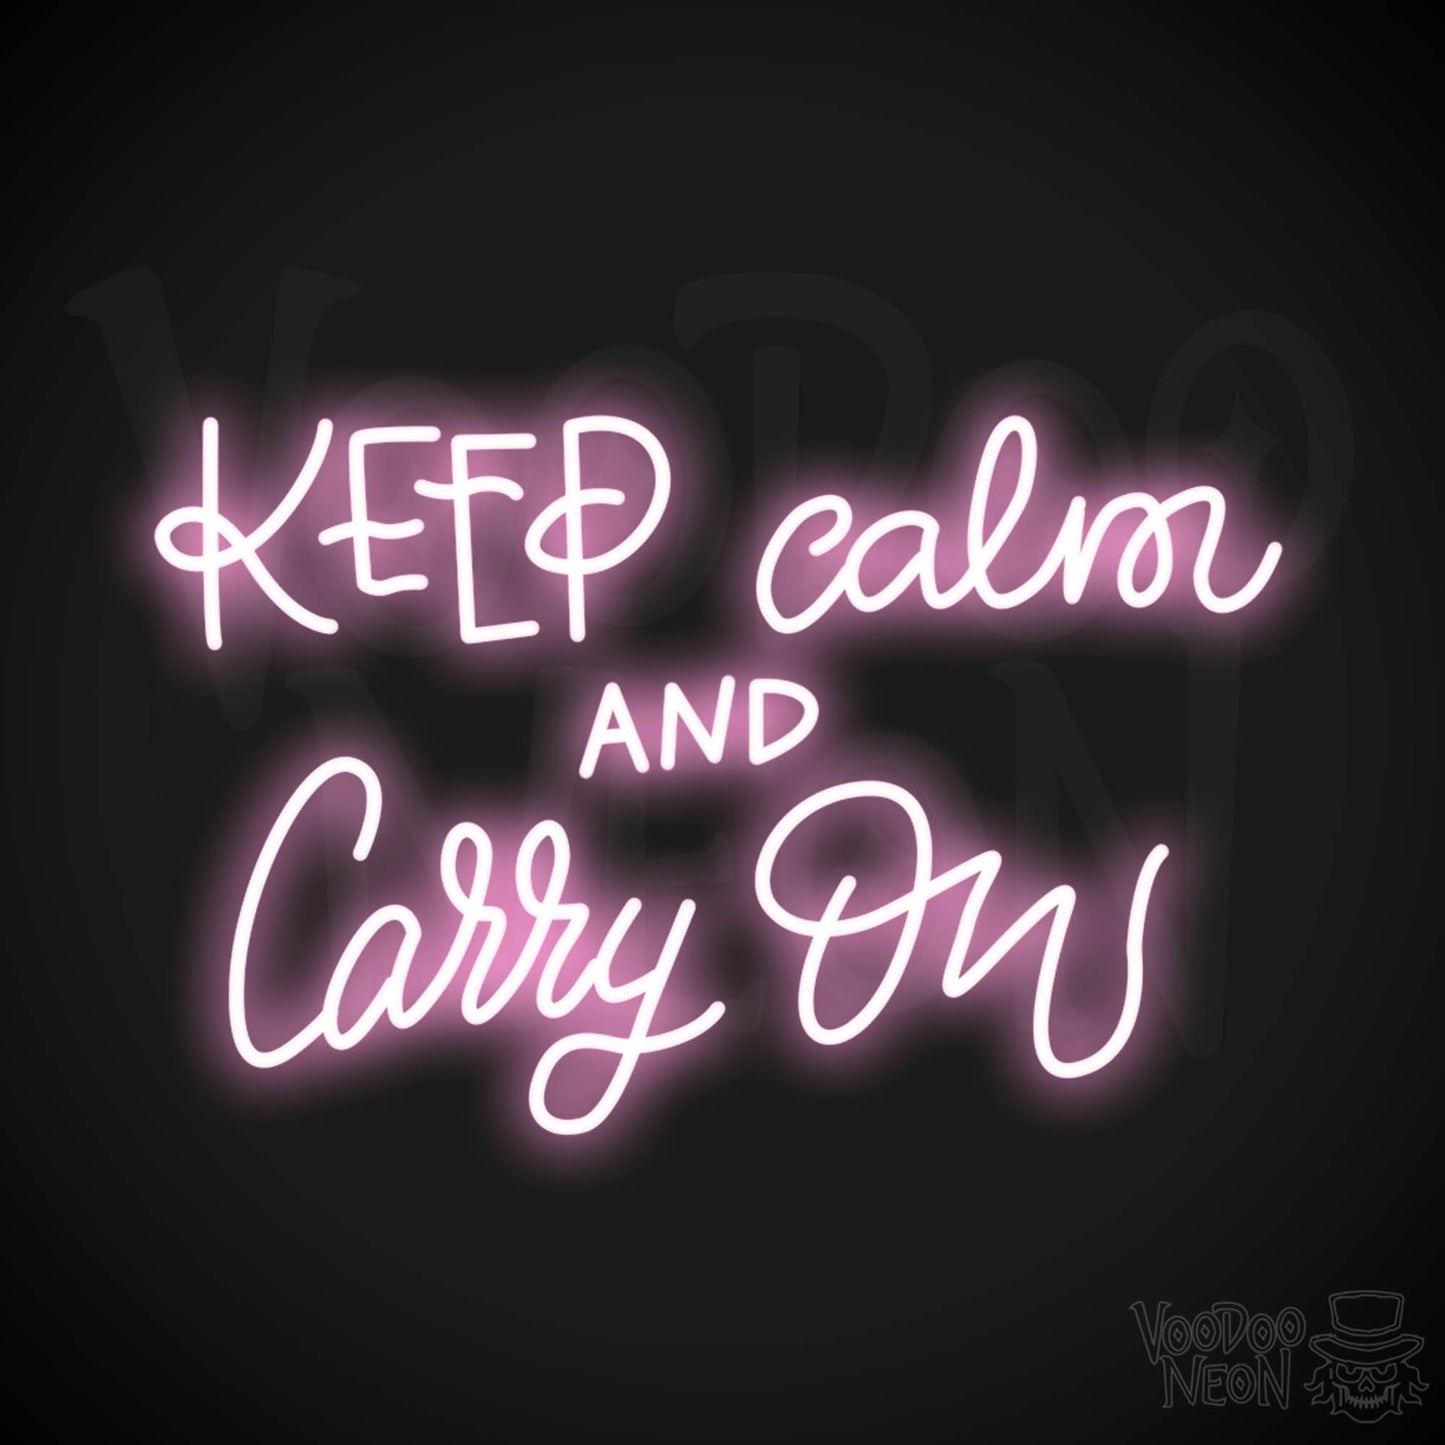 Keep Calm And Carry On Sign - Neon Sign - LED Wall Art - Color Light Pink